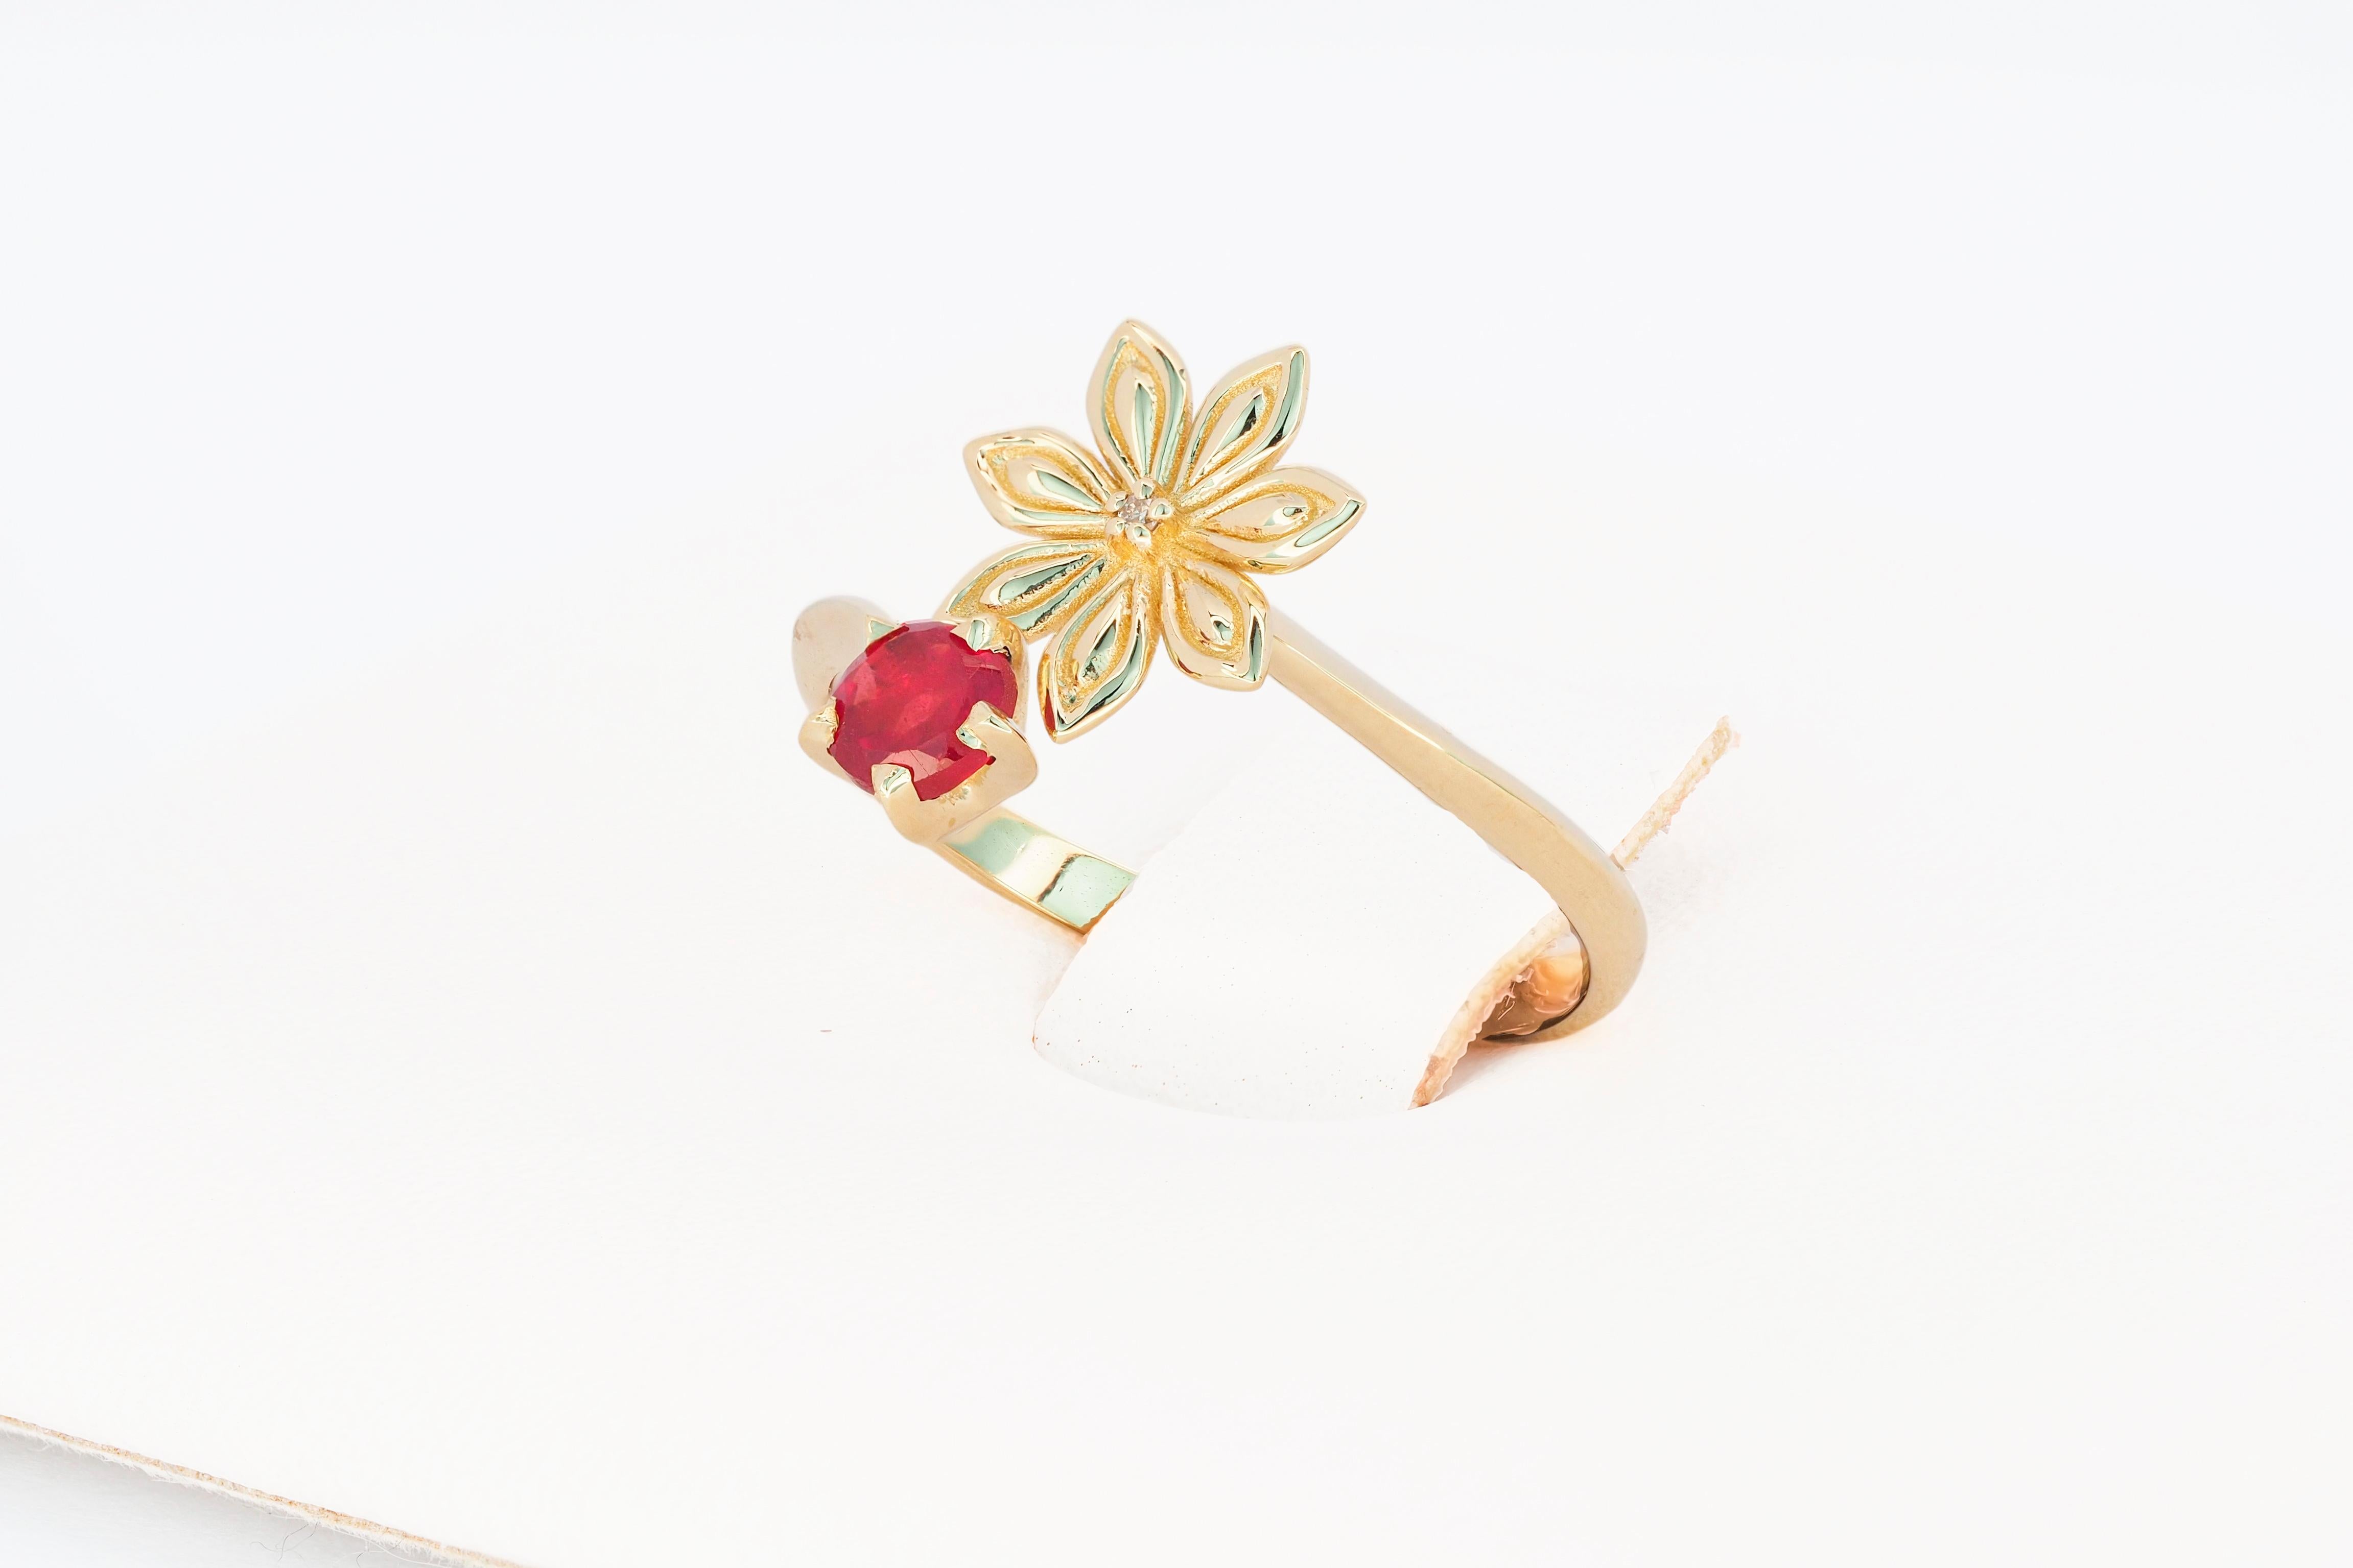 For Sale:   Ruby gold ring. 14 Karat Gold Star Anise Flower Ring. July birthstone ruby ring 9